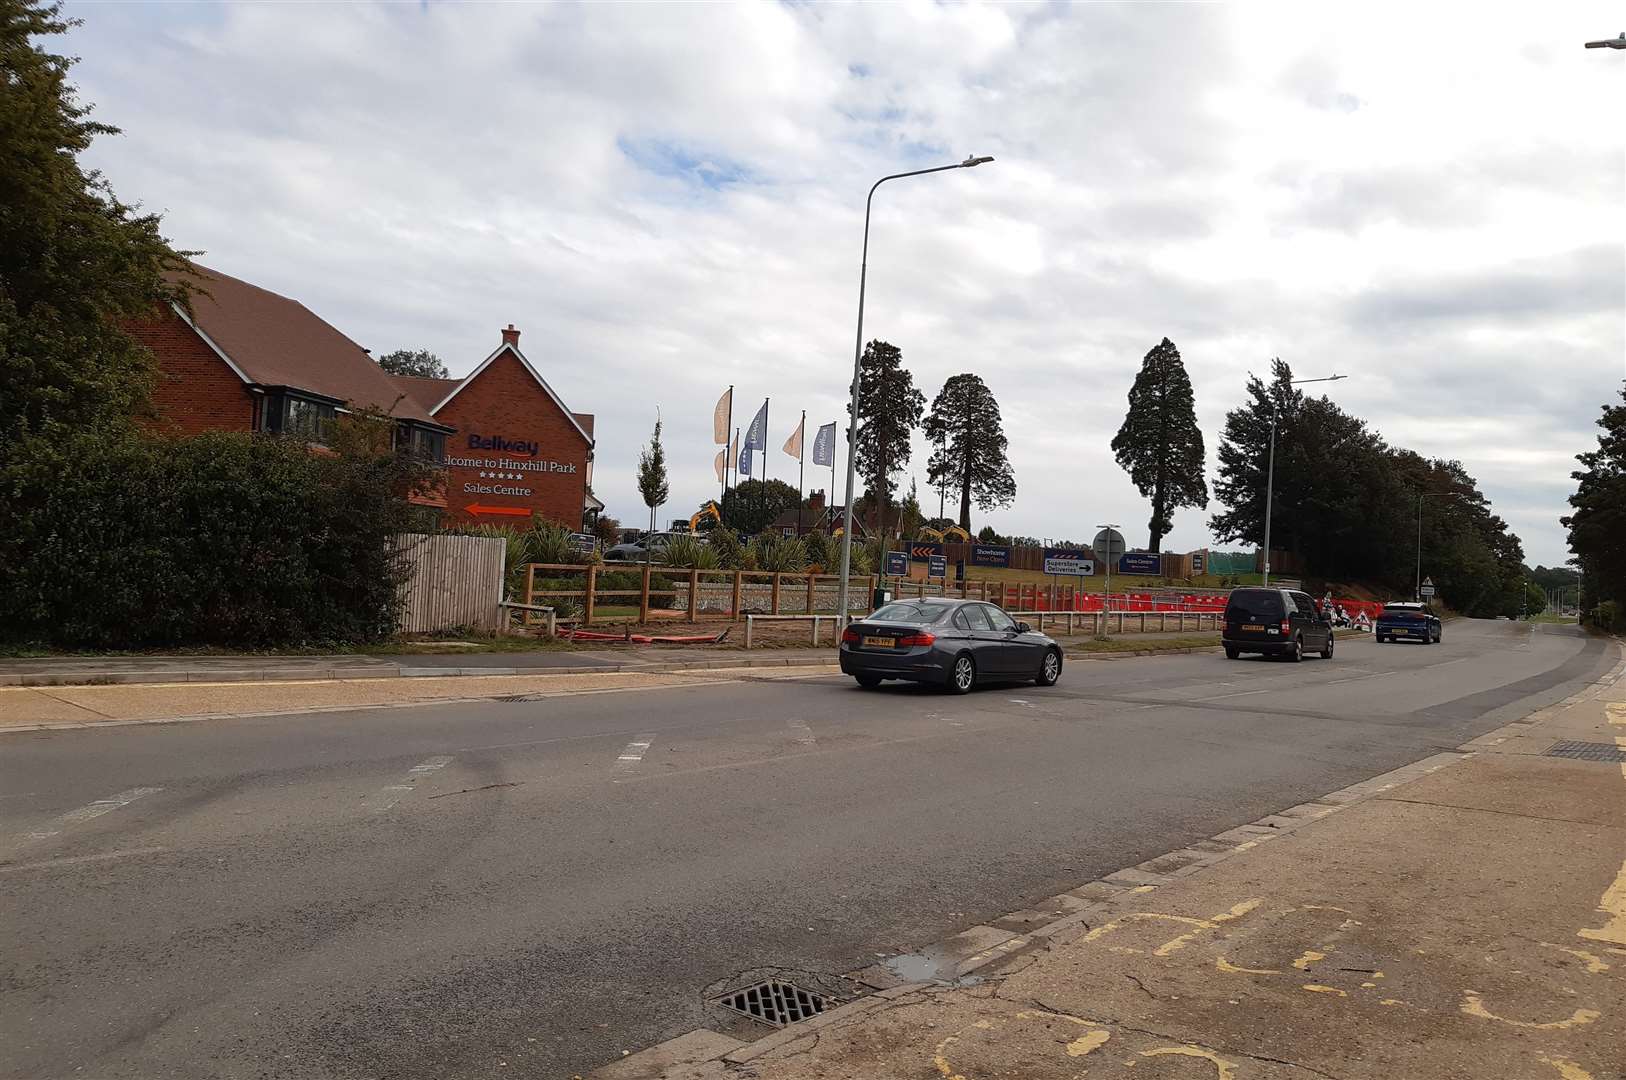 The traffic lights will be installed at the entrance to the Hinxhill Park estate